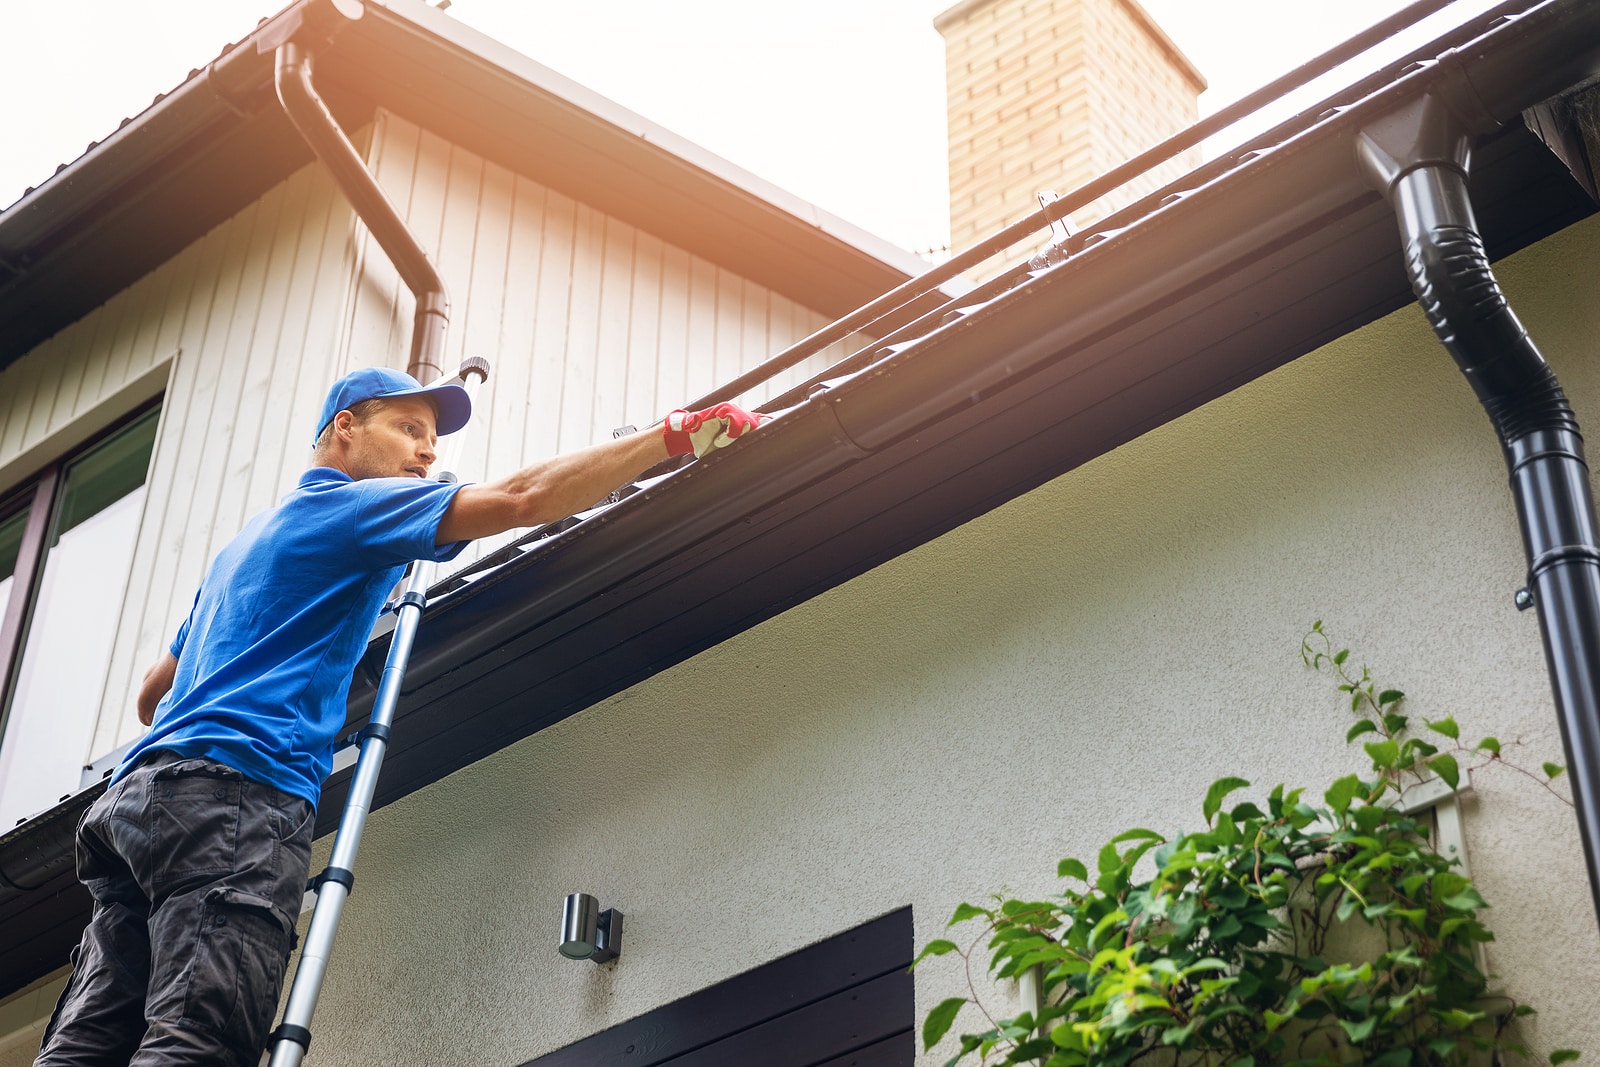 Should You Clean Your Own Gutters or Hire a Professional?